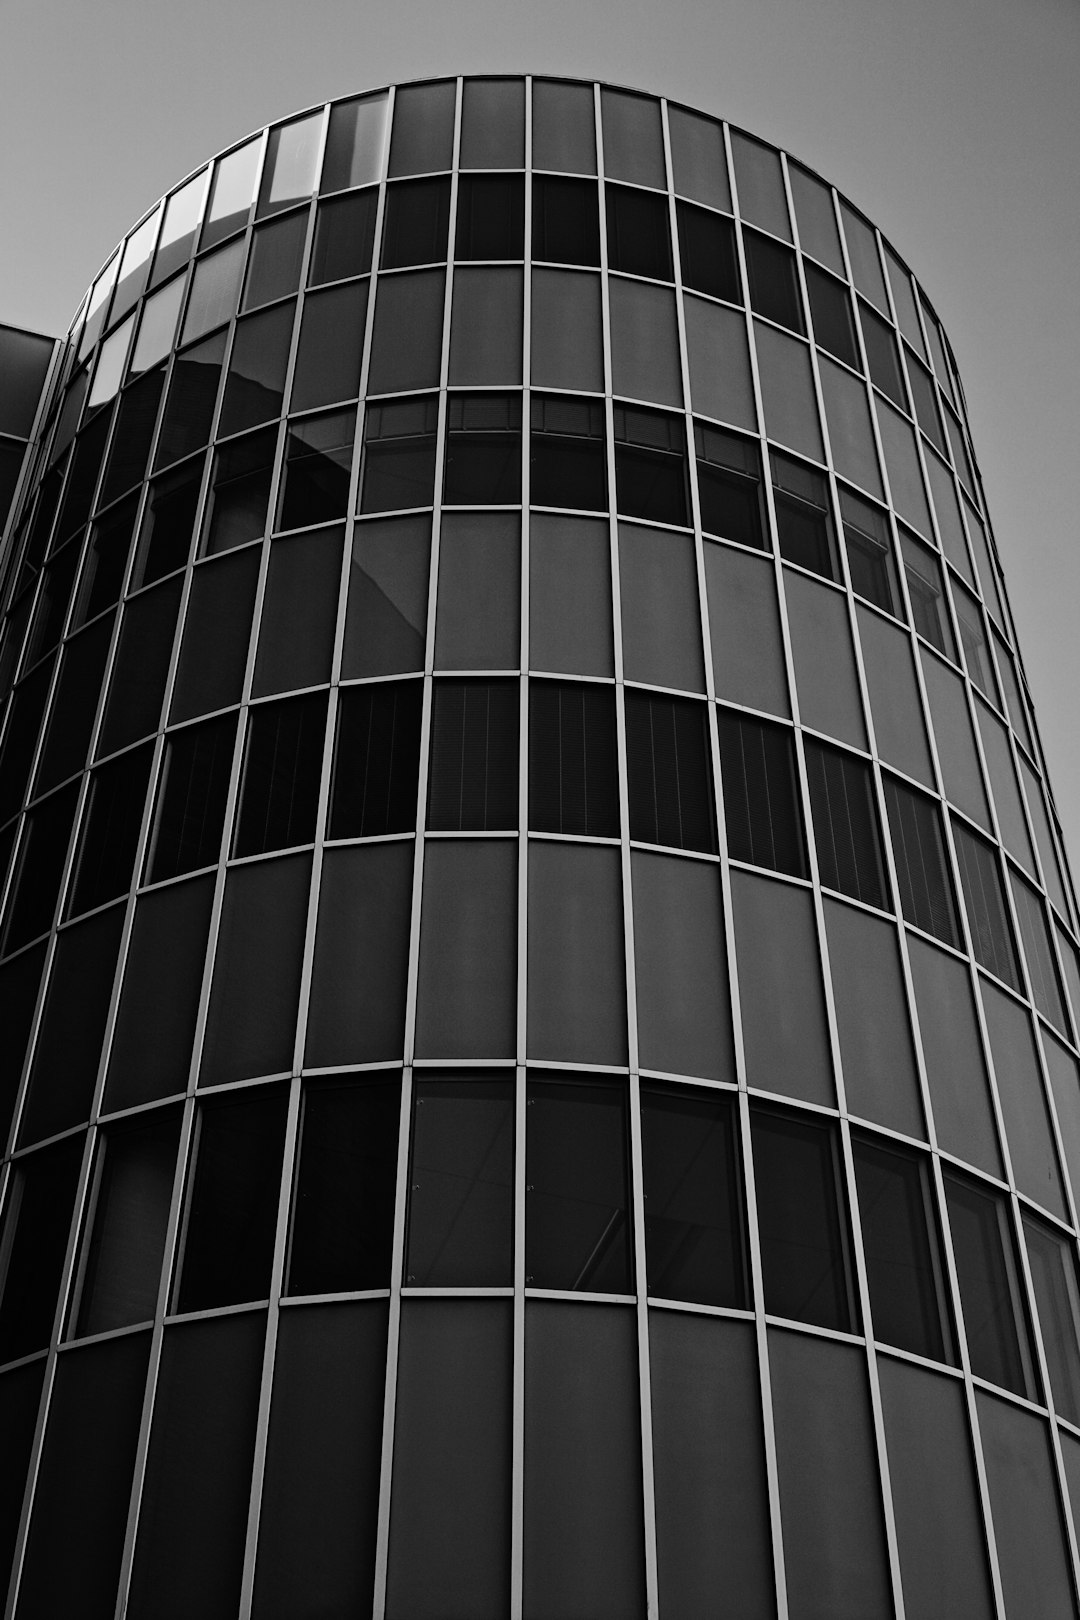 black and white high rise building